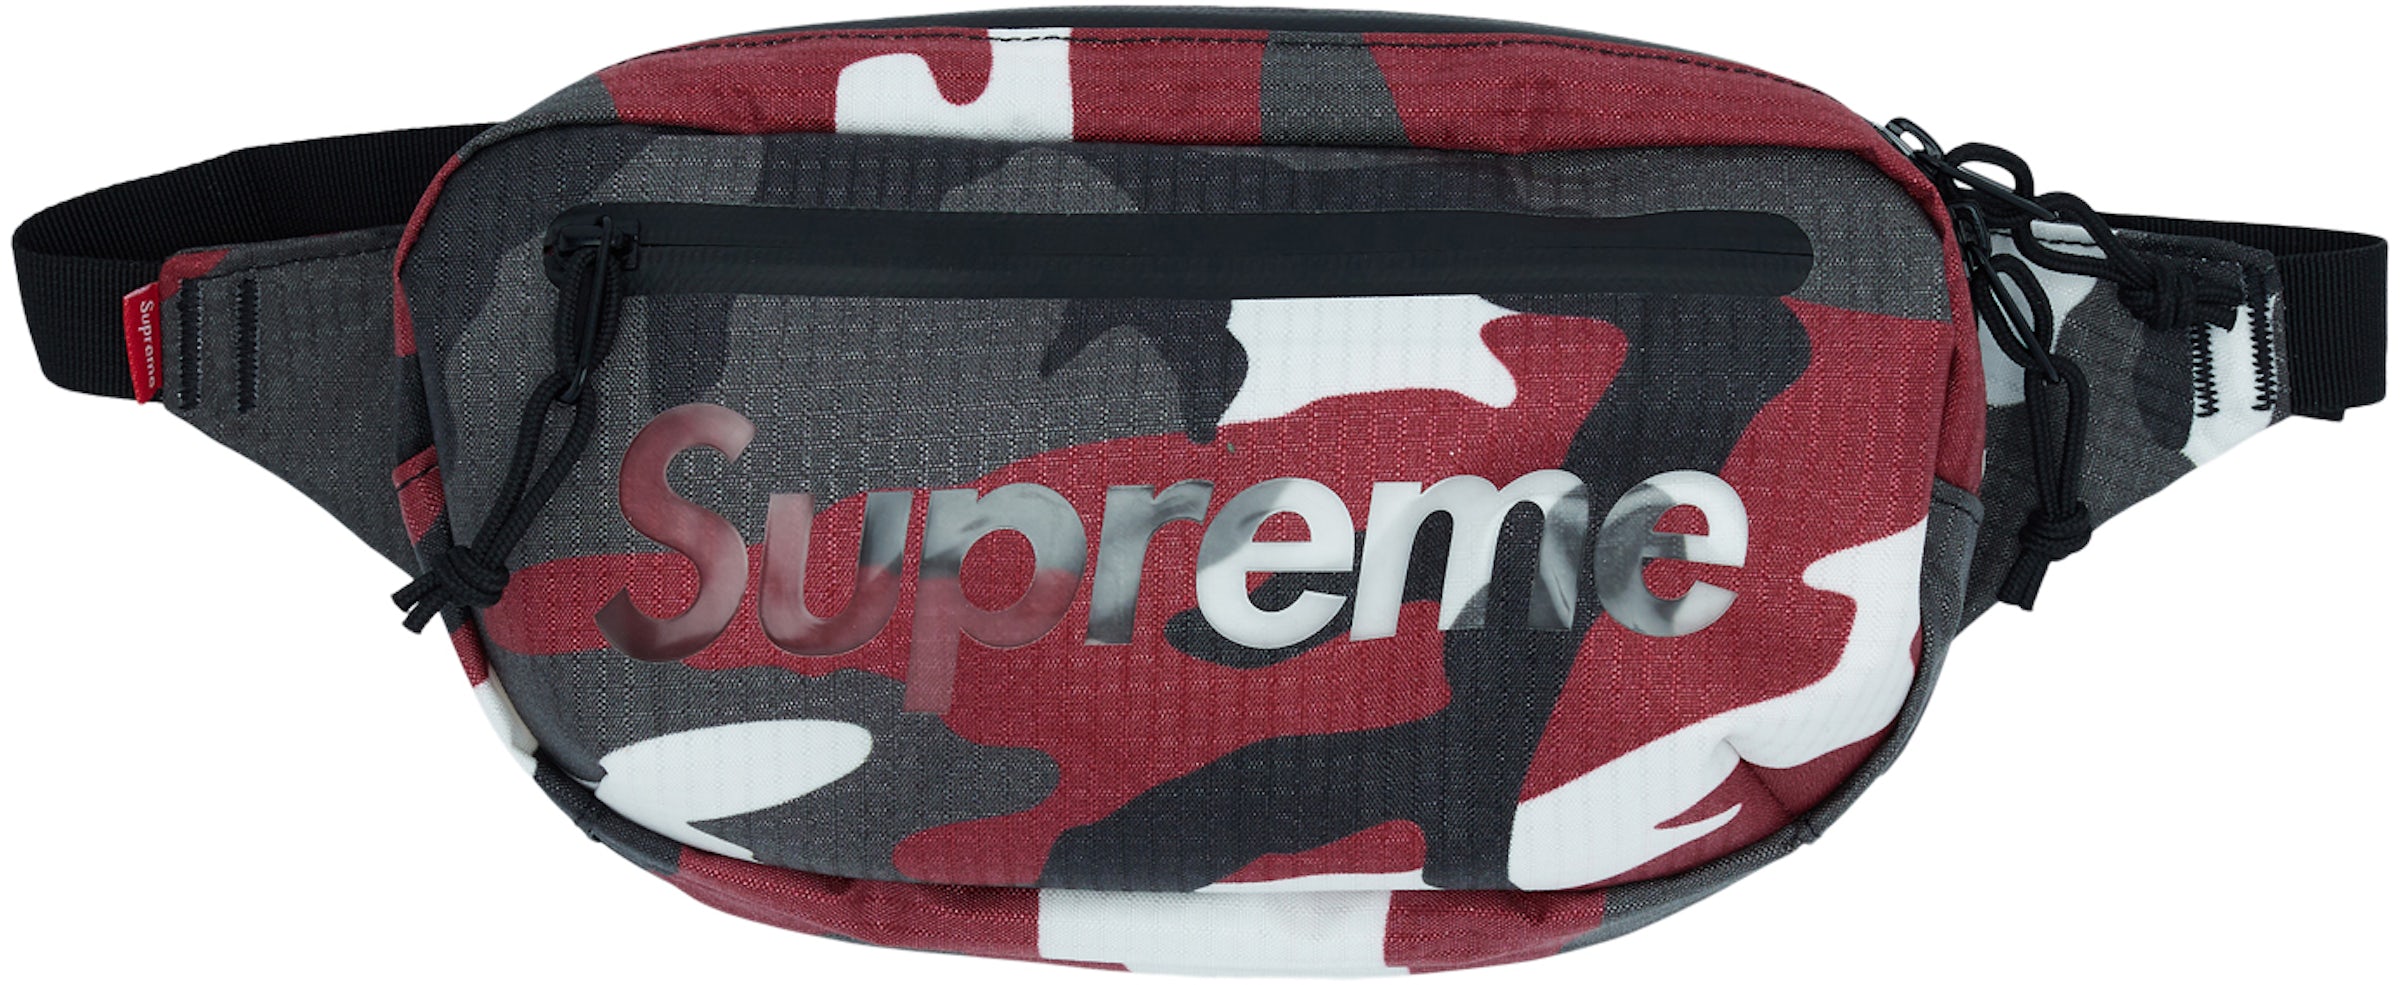 Supreme Duffle Red 100 % Authentic